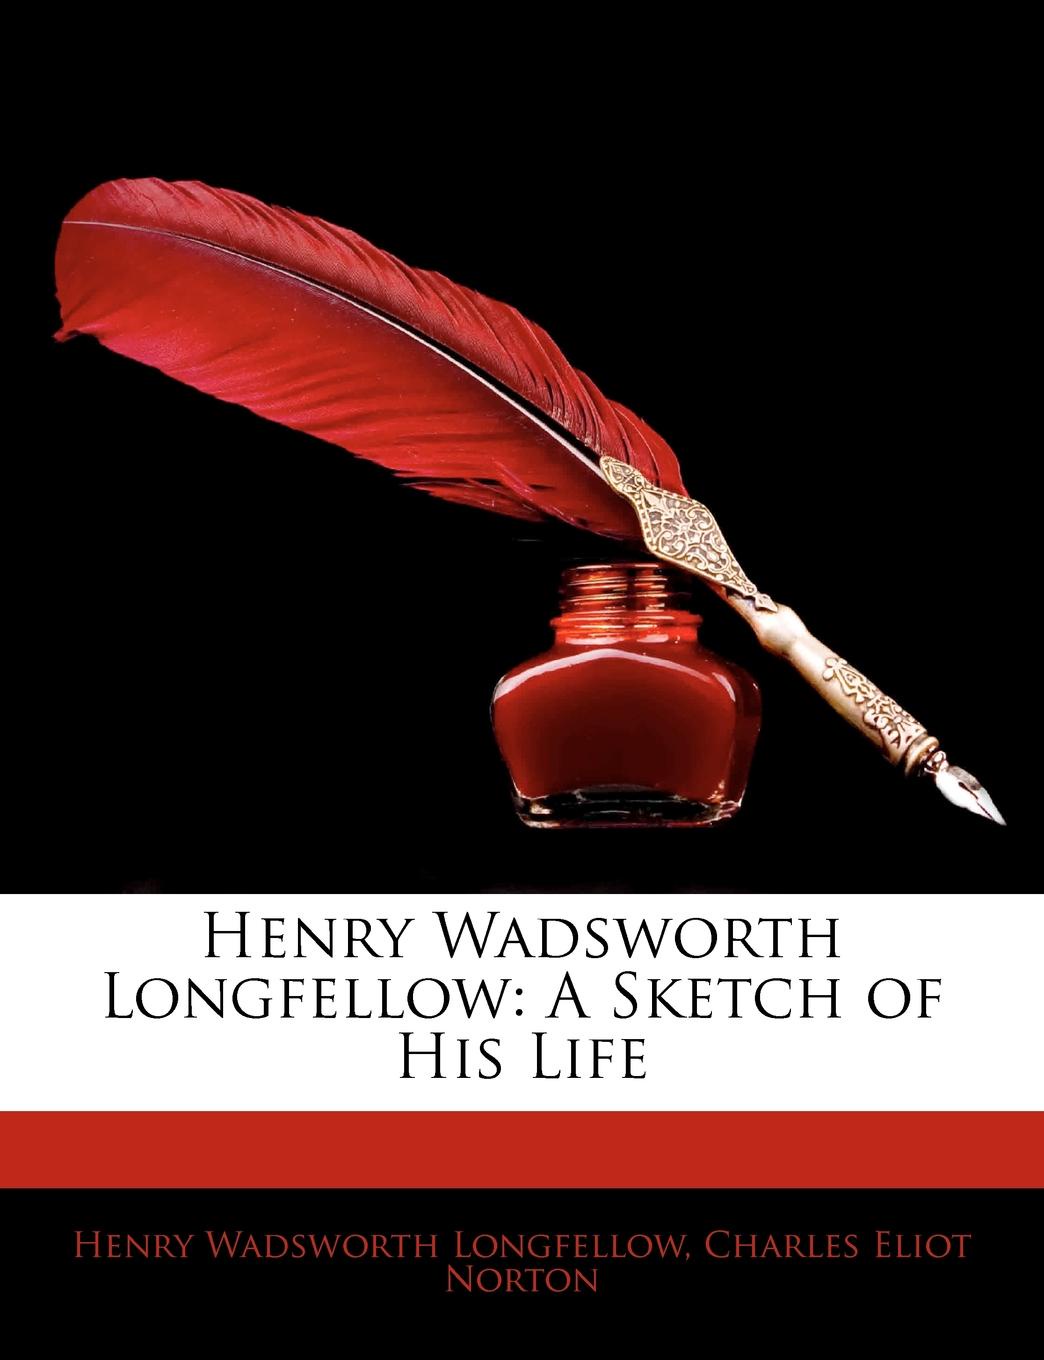 Henry Wadsworth Longfellow. A Sketch of His Life